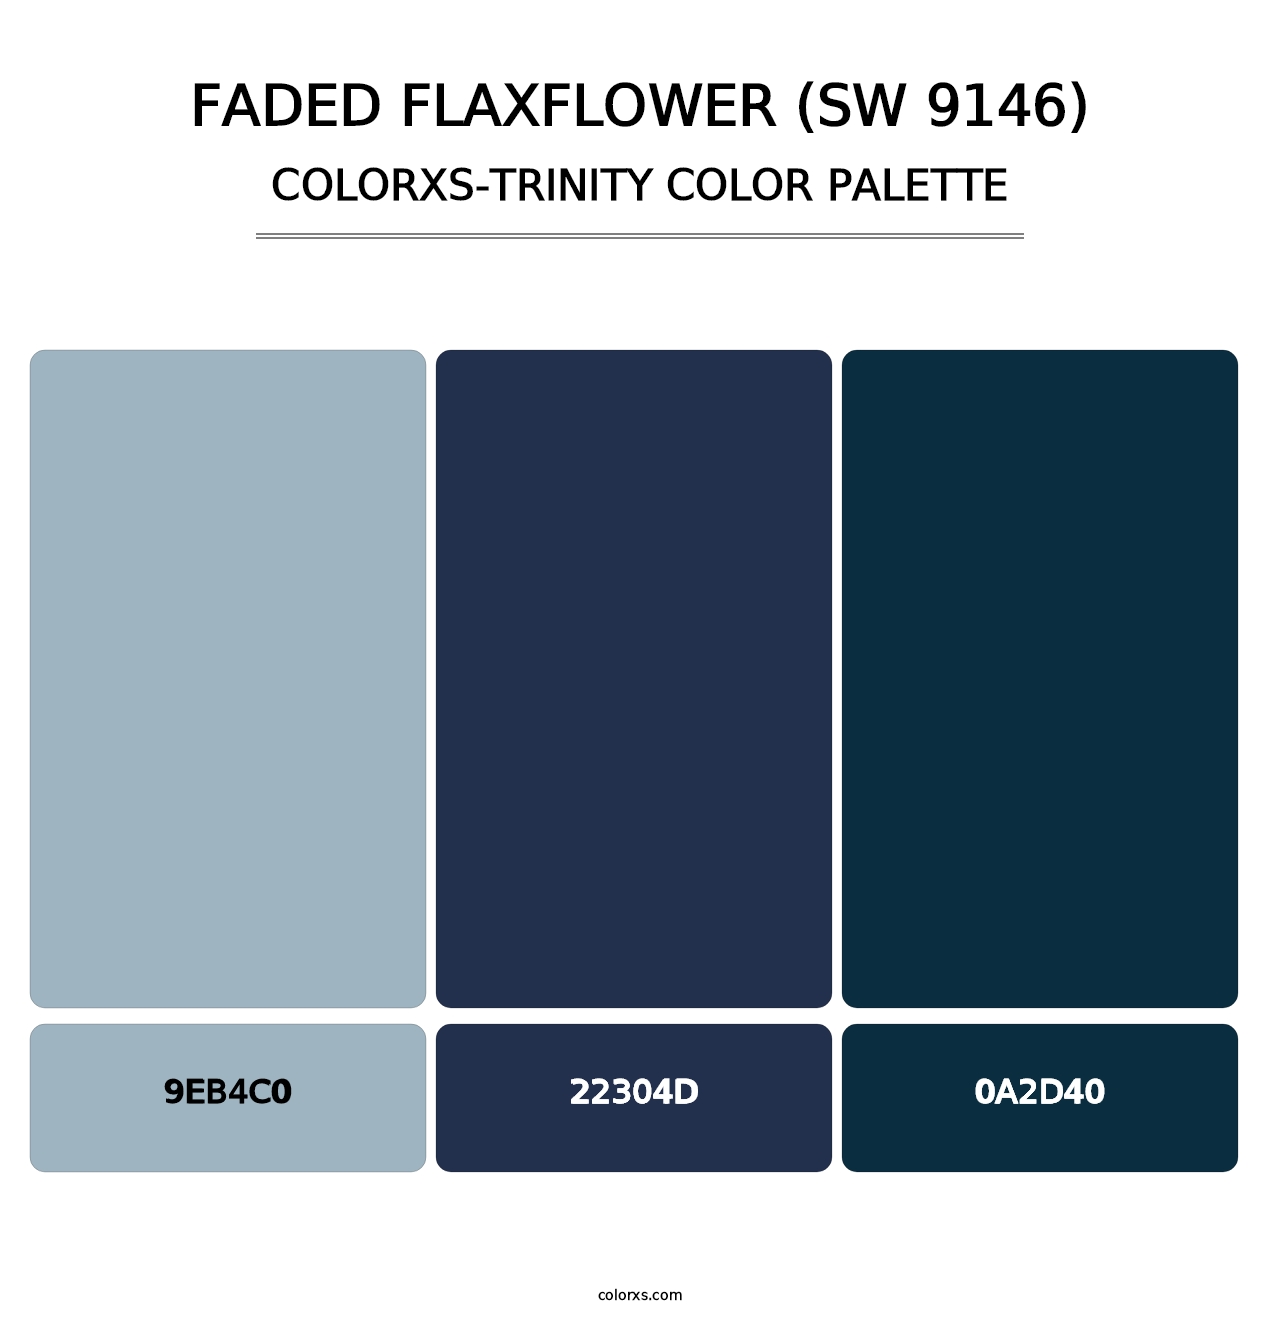 Faded Flaxflower (SW 9146) - Colorxs Trinity Palette